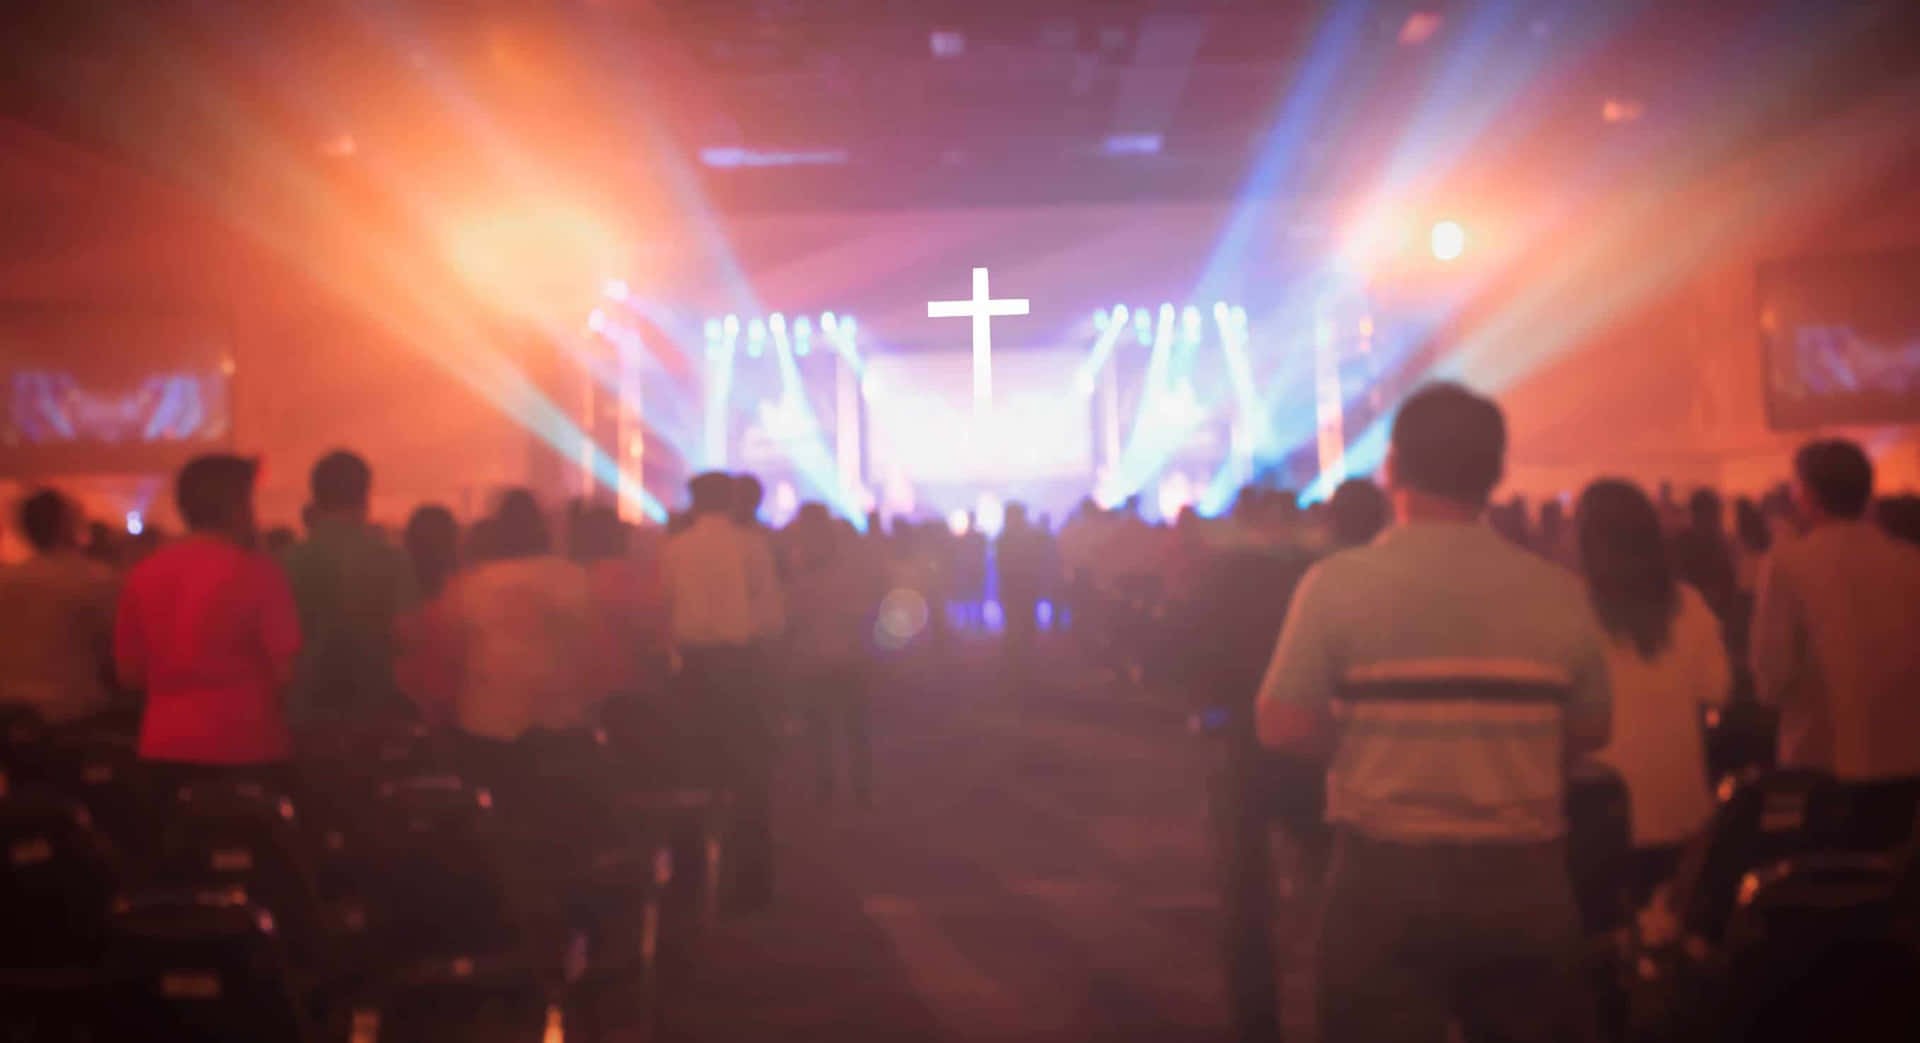 Illuminate your church's stage with a magnificent background